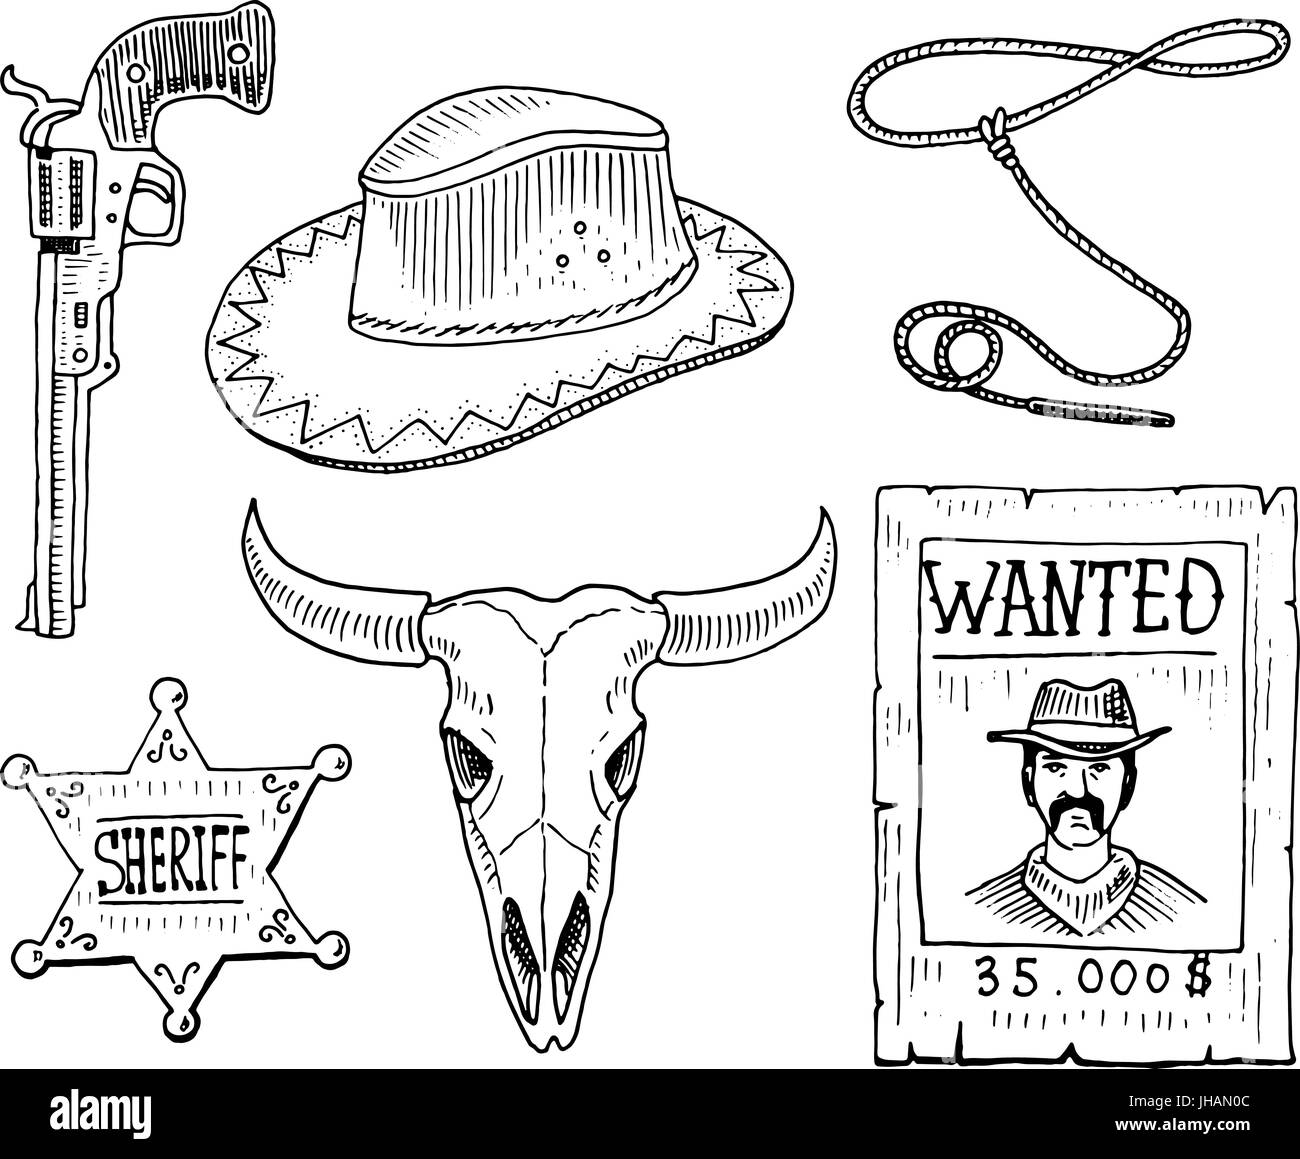 Wild west, rodeo show, cowboy or indians with lasso. hat and gun, cactus with horseshoe, sheriff star and bison, bull skull and wanted poster. engraved hand drawn in old sketch and vintage style. Stock Vector